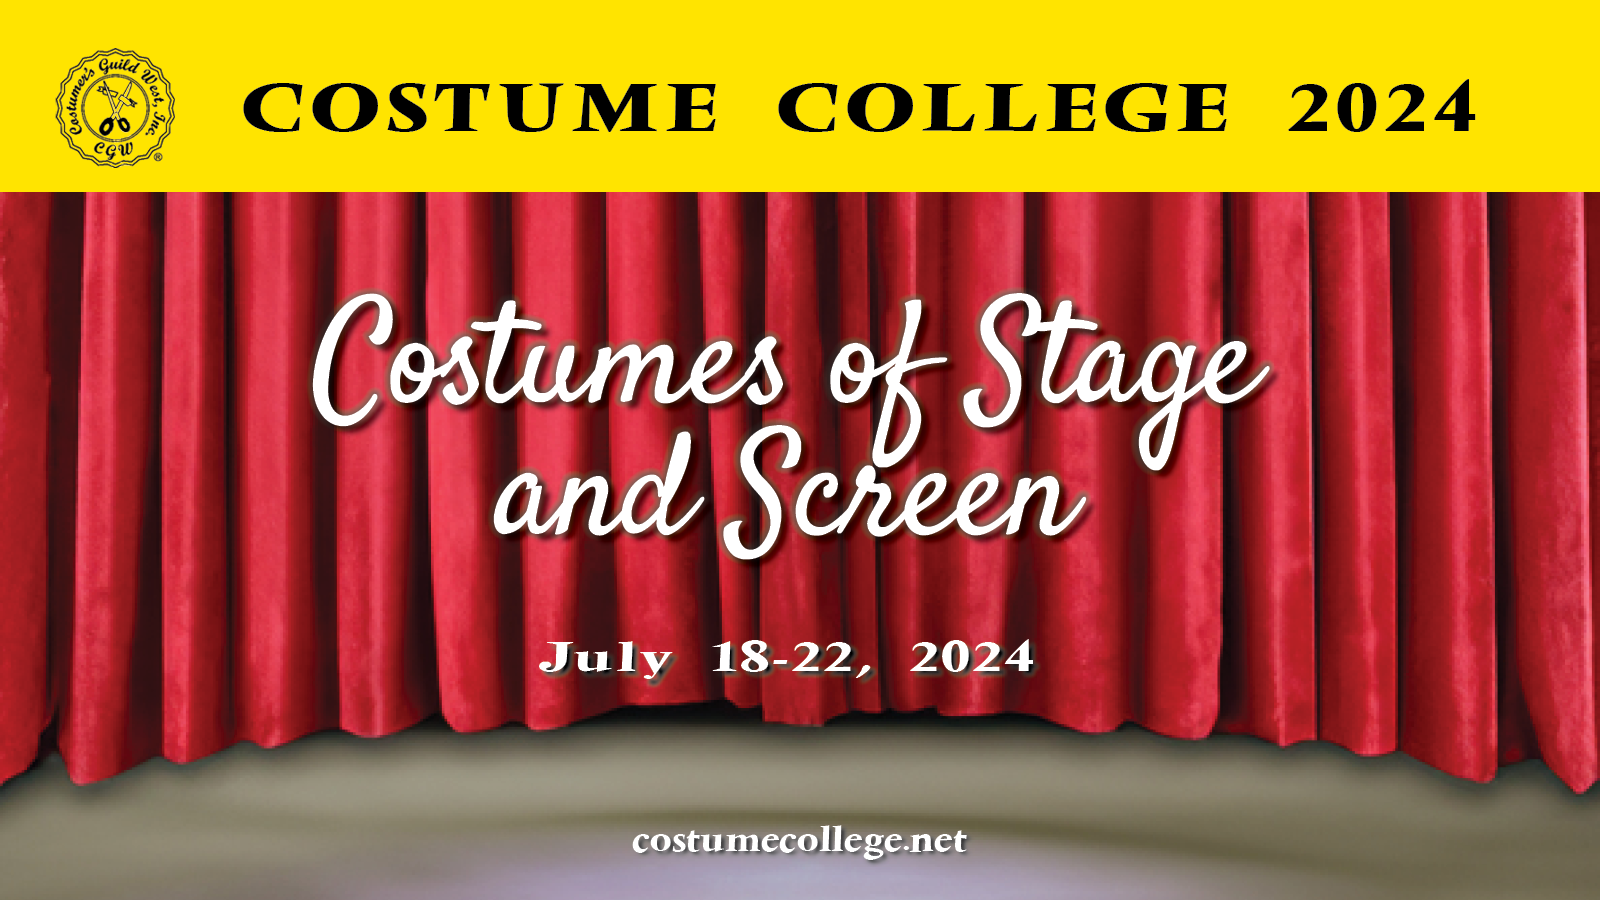 Theme Announcement 2024 - Costumes of Stage and Screen